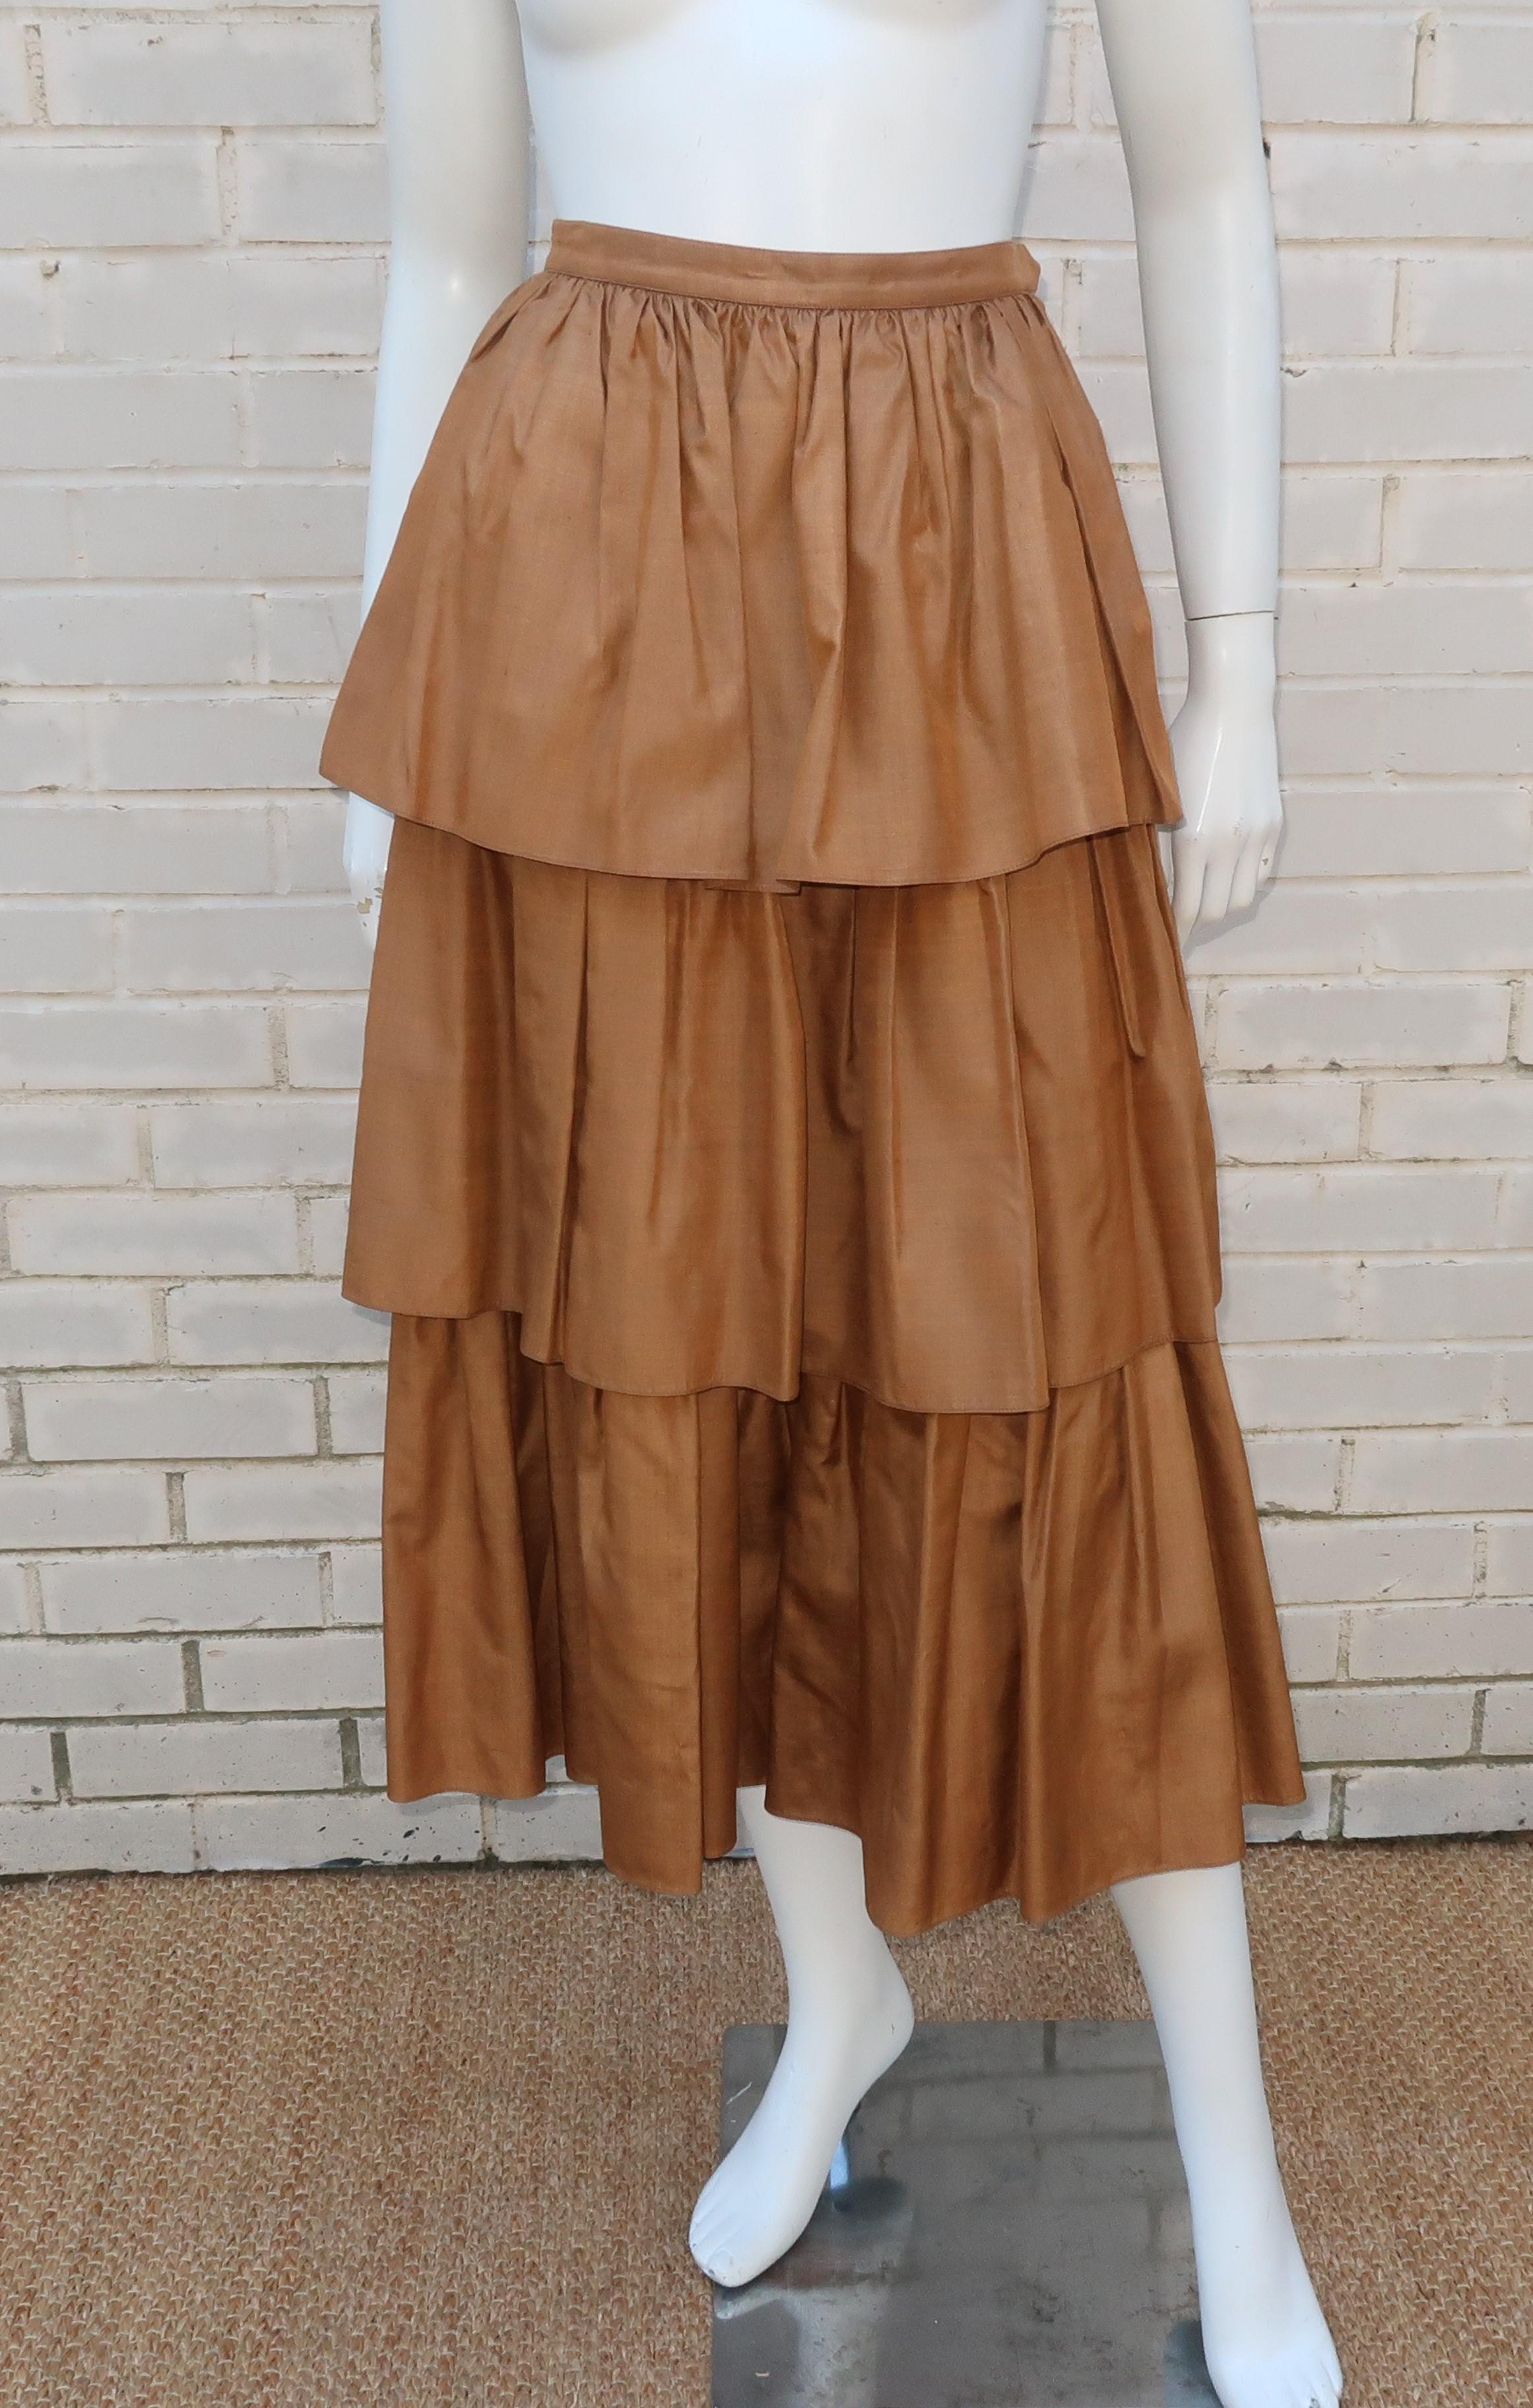 YVES SAINT LAURENT Rive Gauche Silk Tiered Peasant Skirt, 1970's For Sale 4